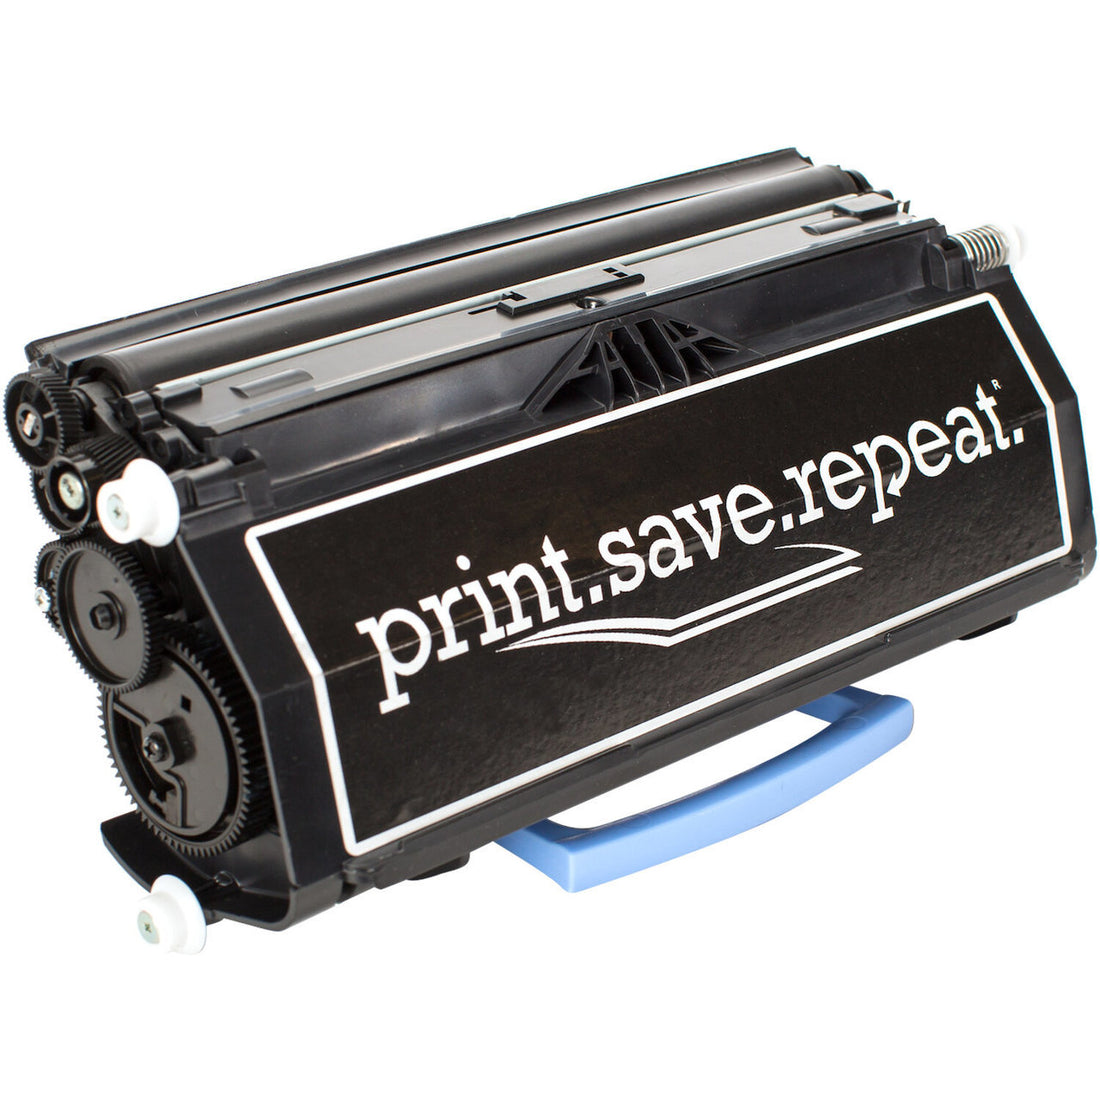 Dell 2350d / 2350dn: Replace the Toner Cartridge